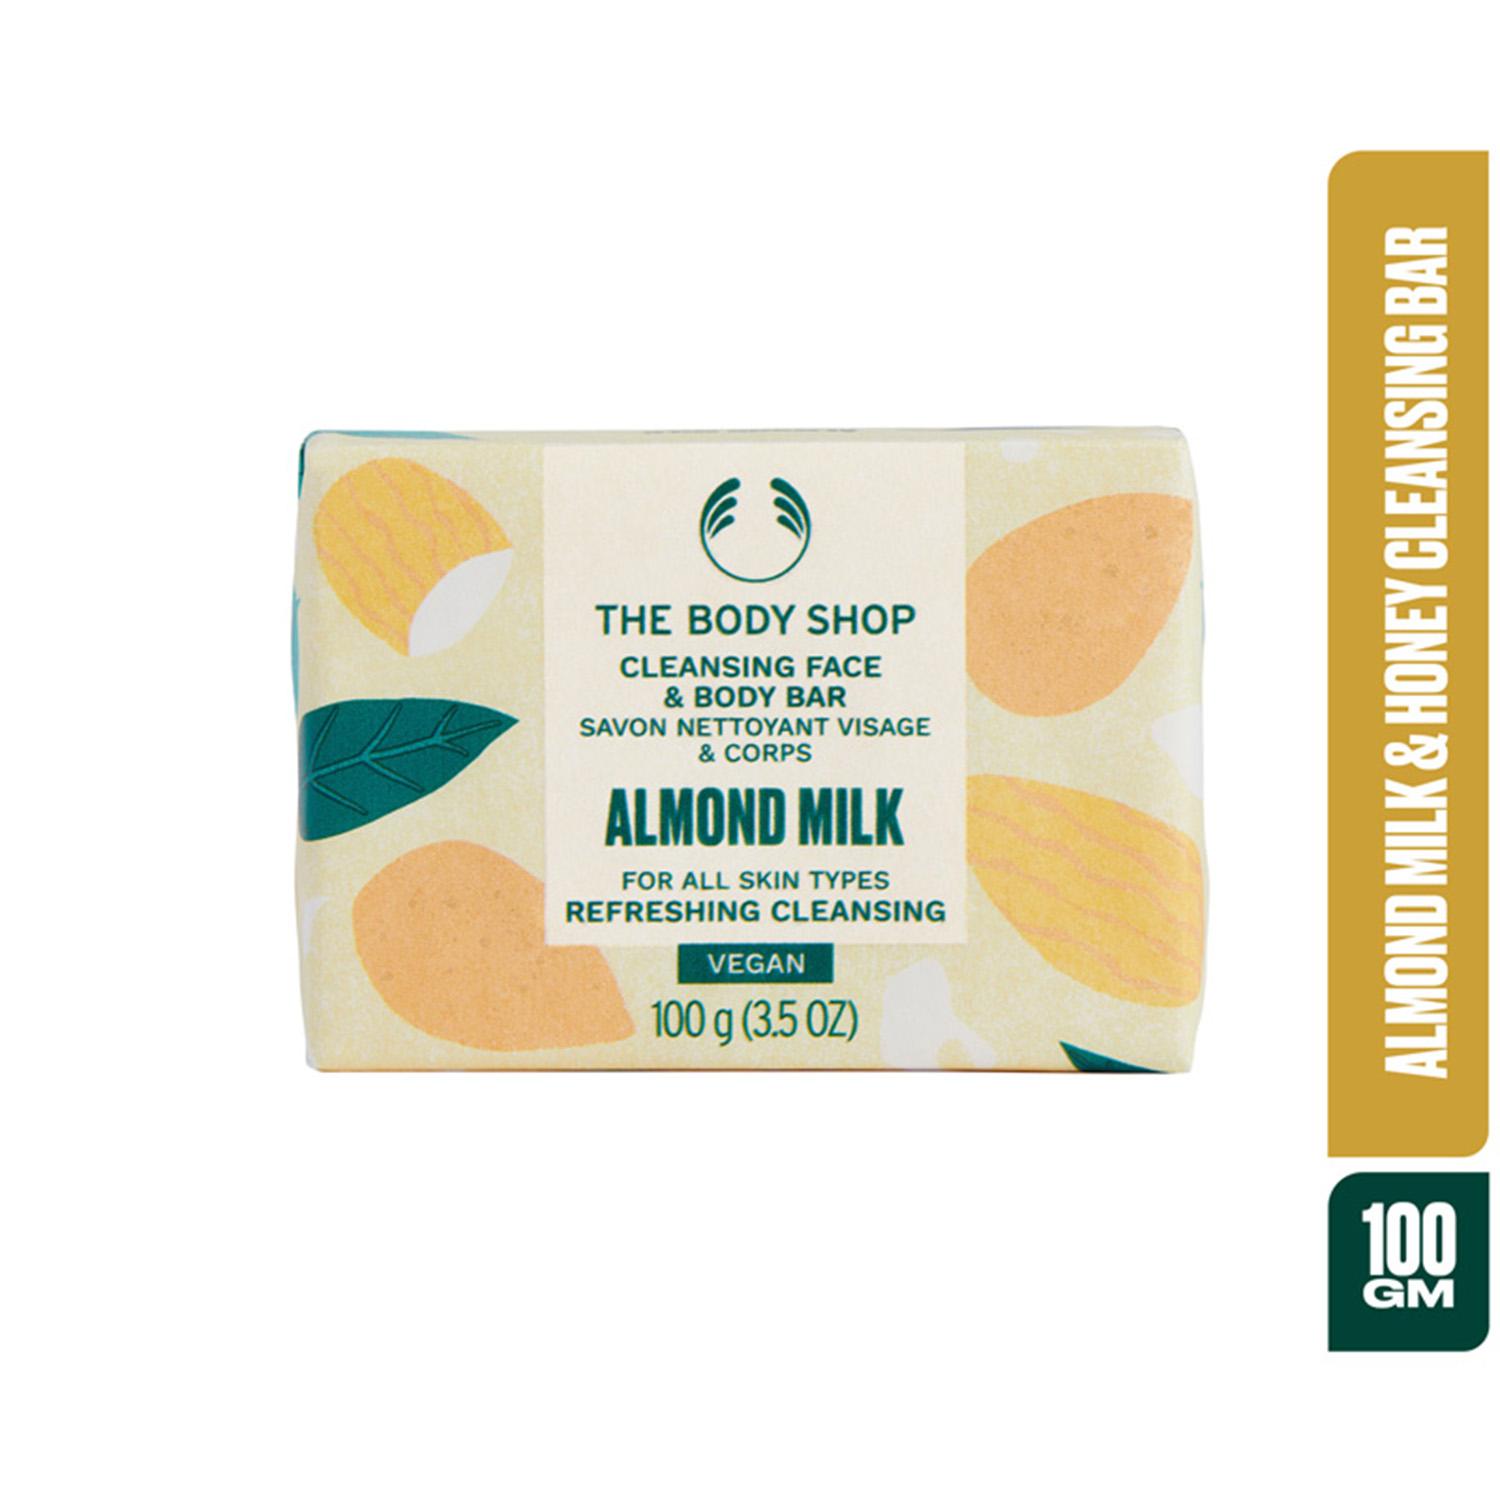 The Body Shop | The Body Shop Almond Milk Cleansing Face & Body Bar (100g)